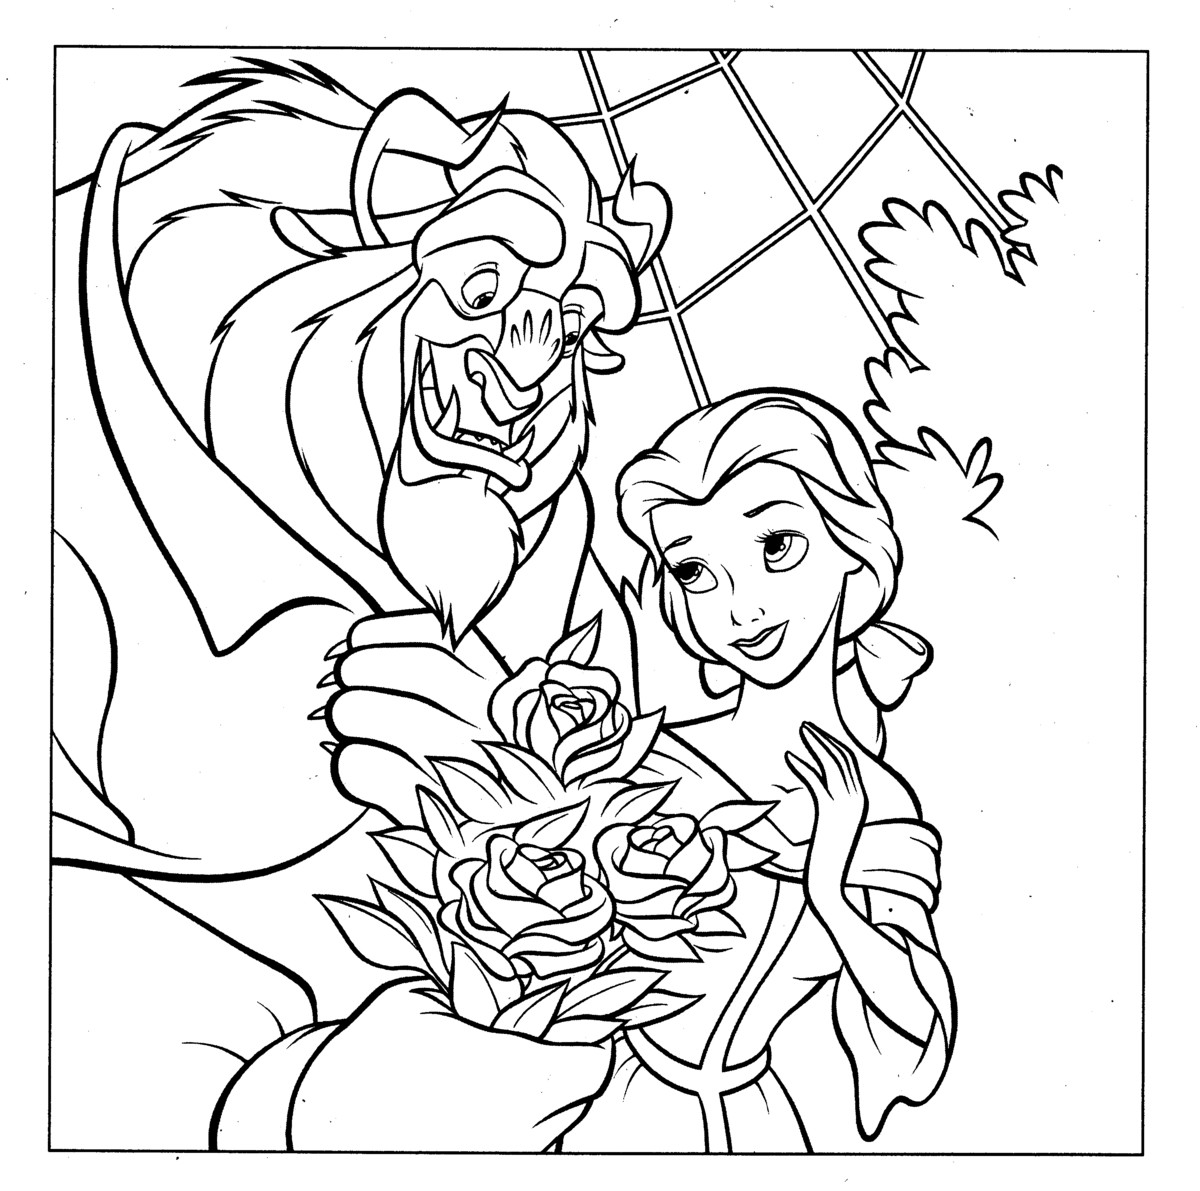 Beauty and the Beast Belle Coloring Pages Download | Kids Online World Blog